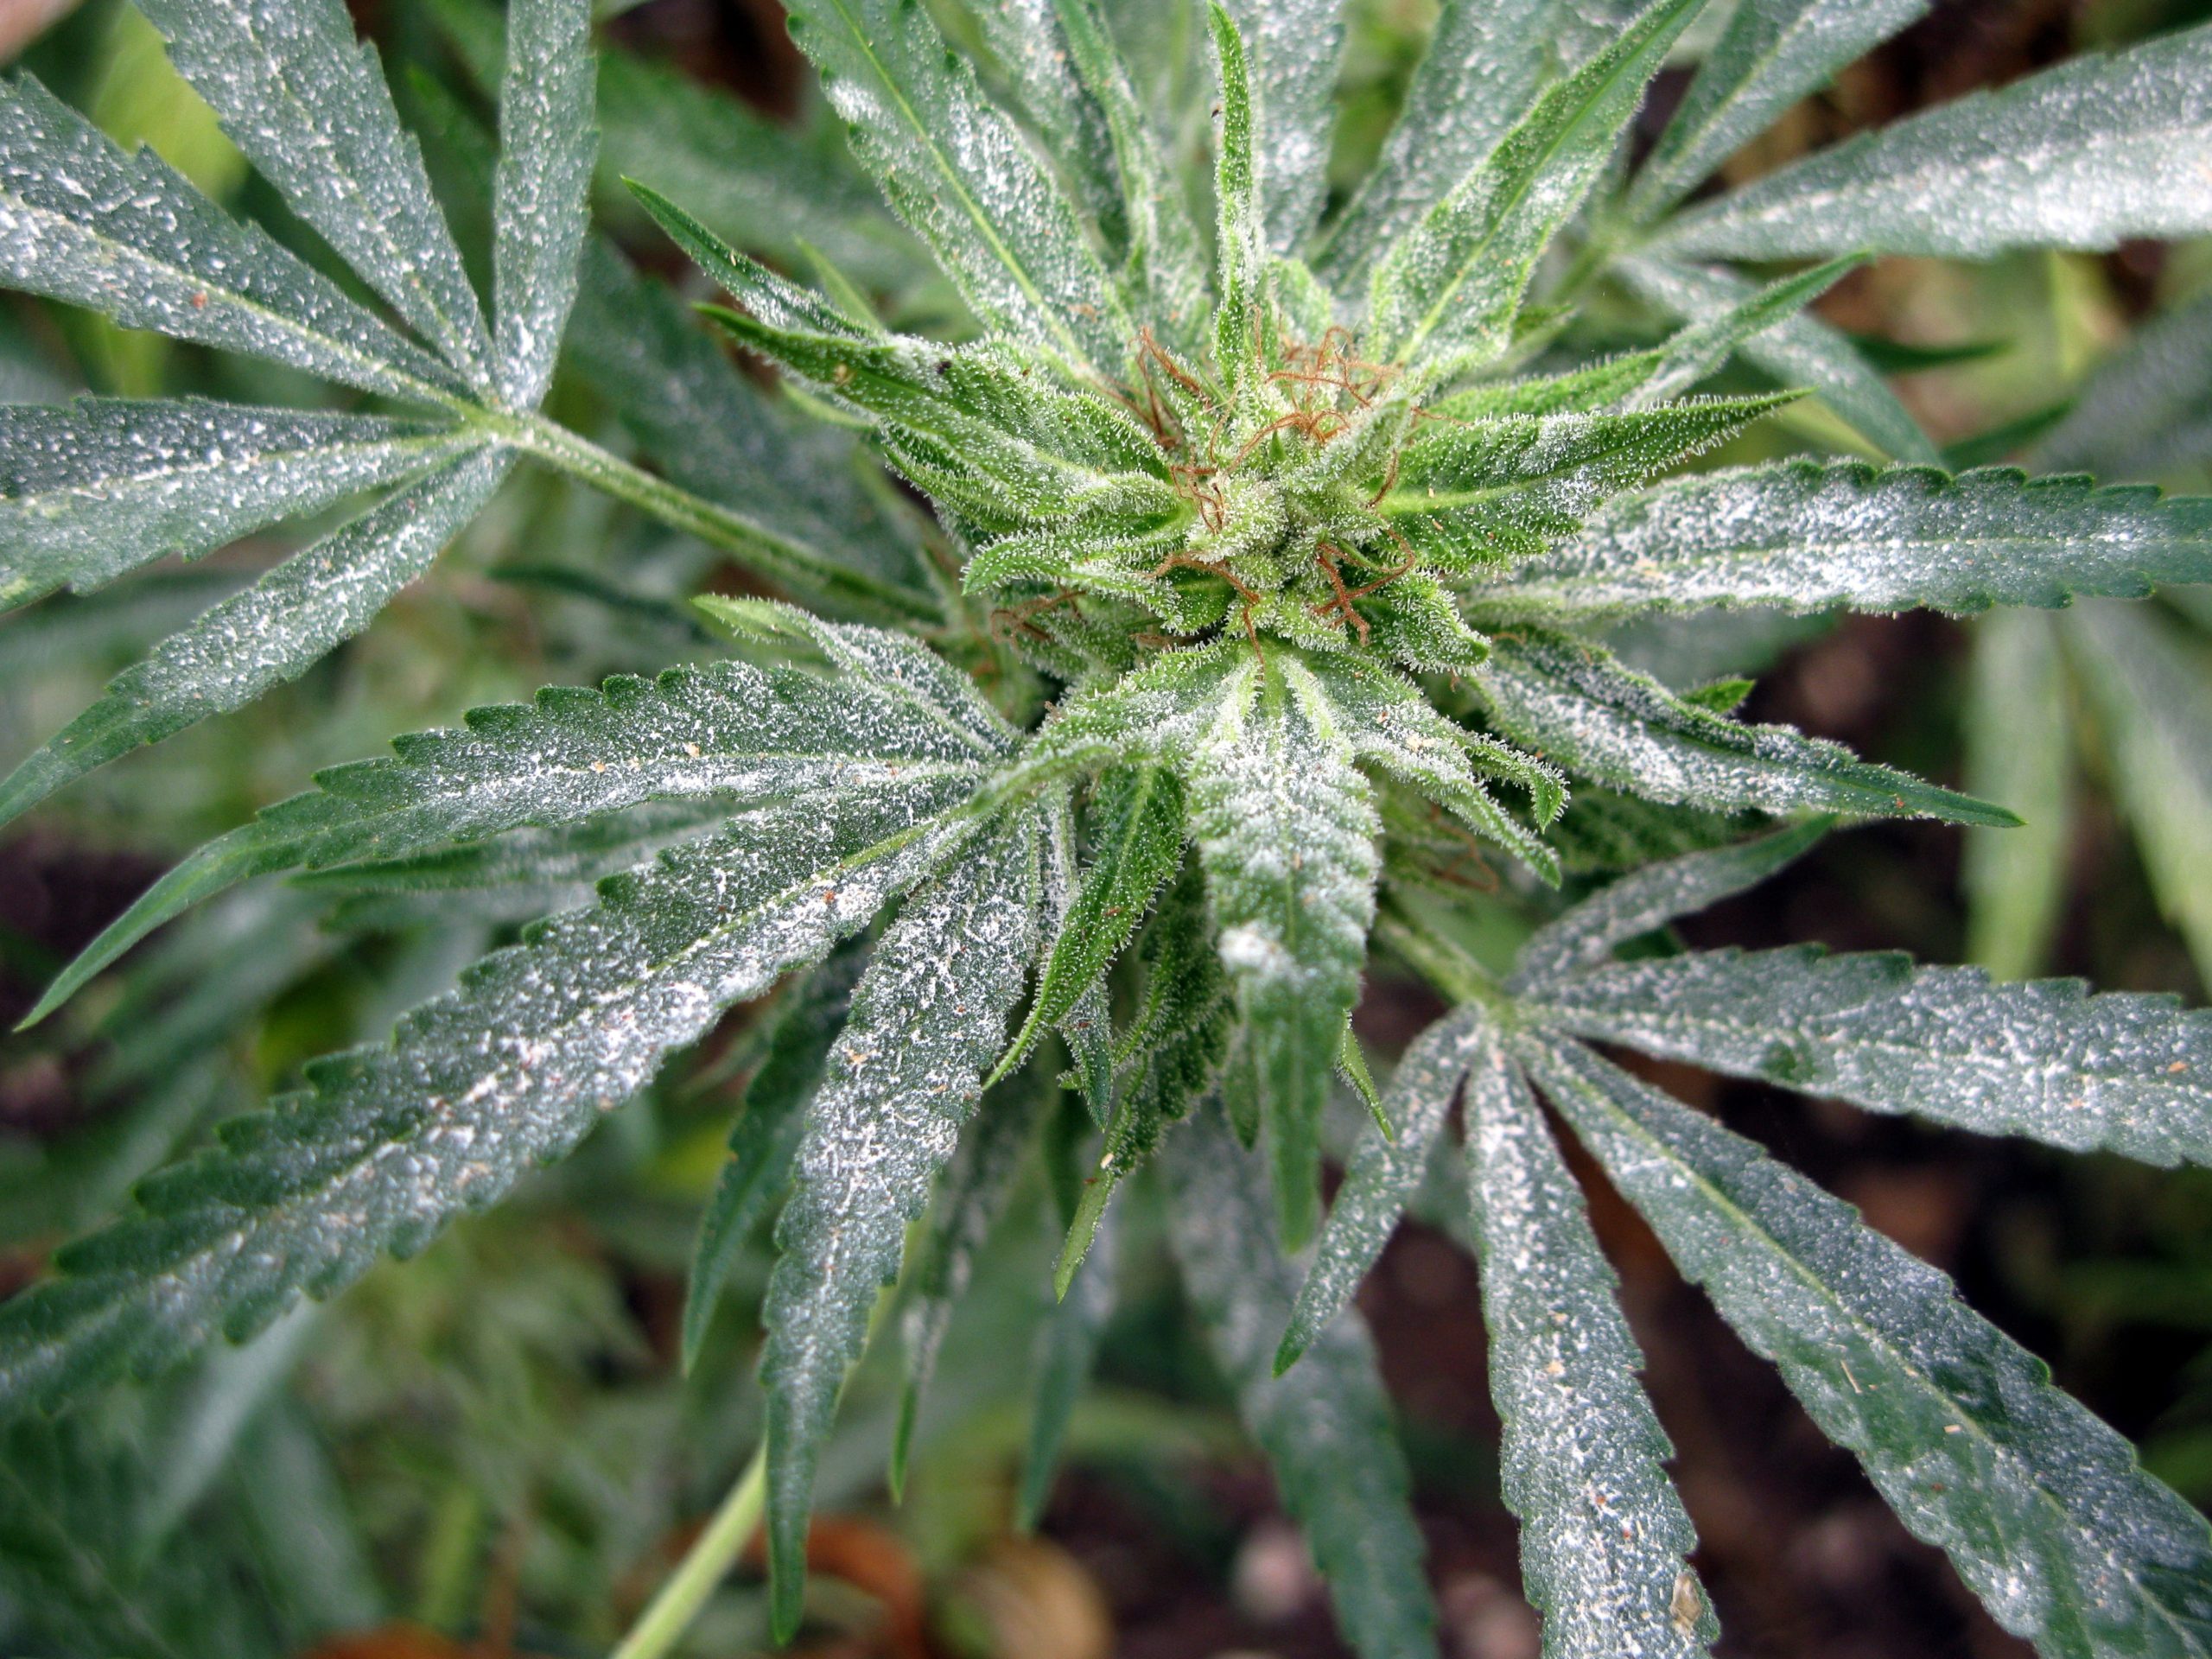 how to spot bad weed powdery mildew